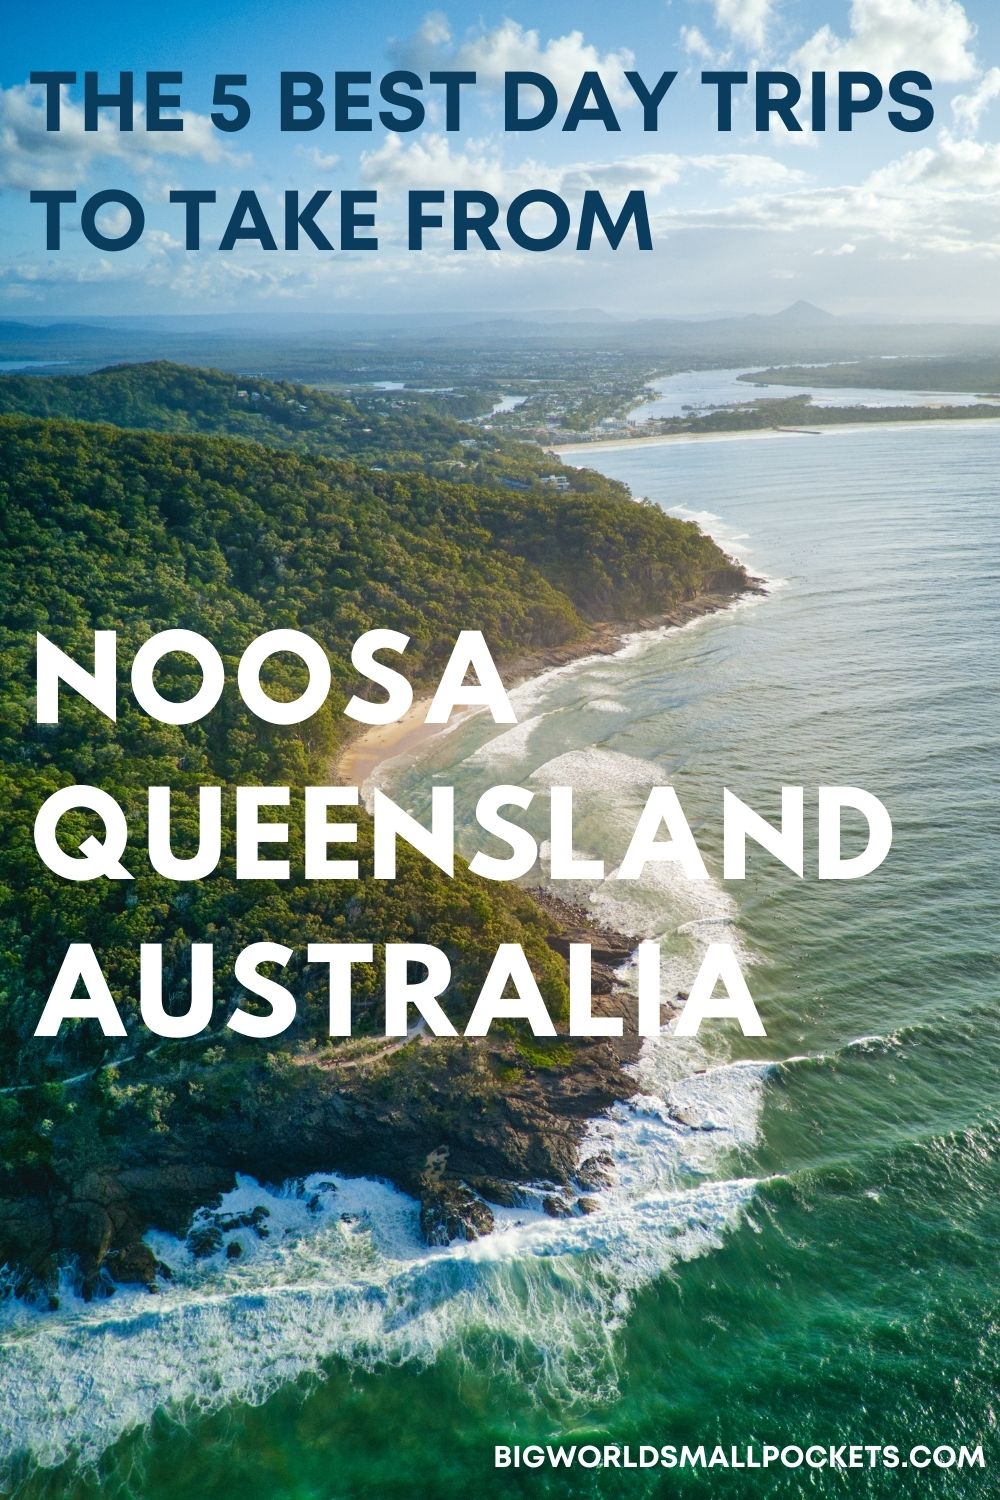 Top 5 Noosa Day Trips